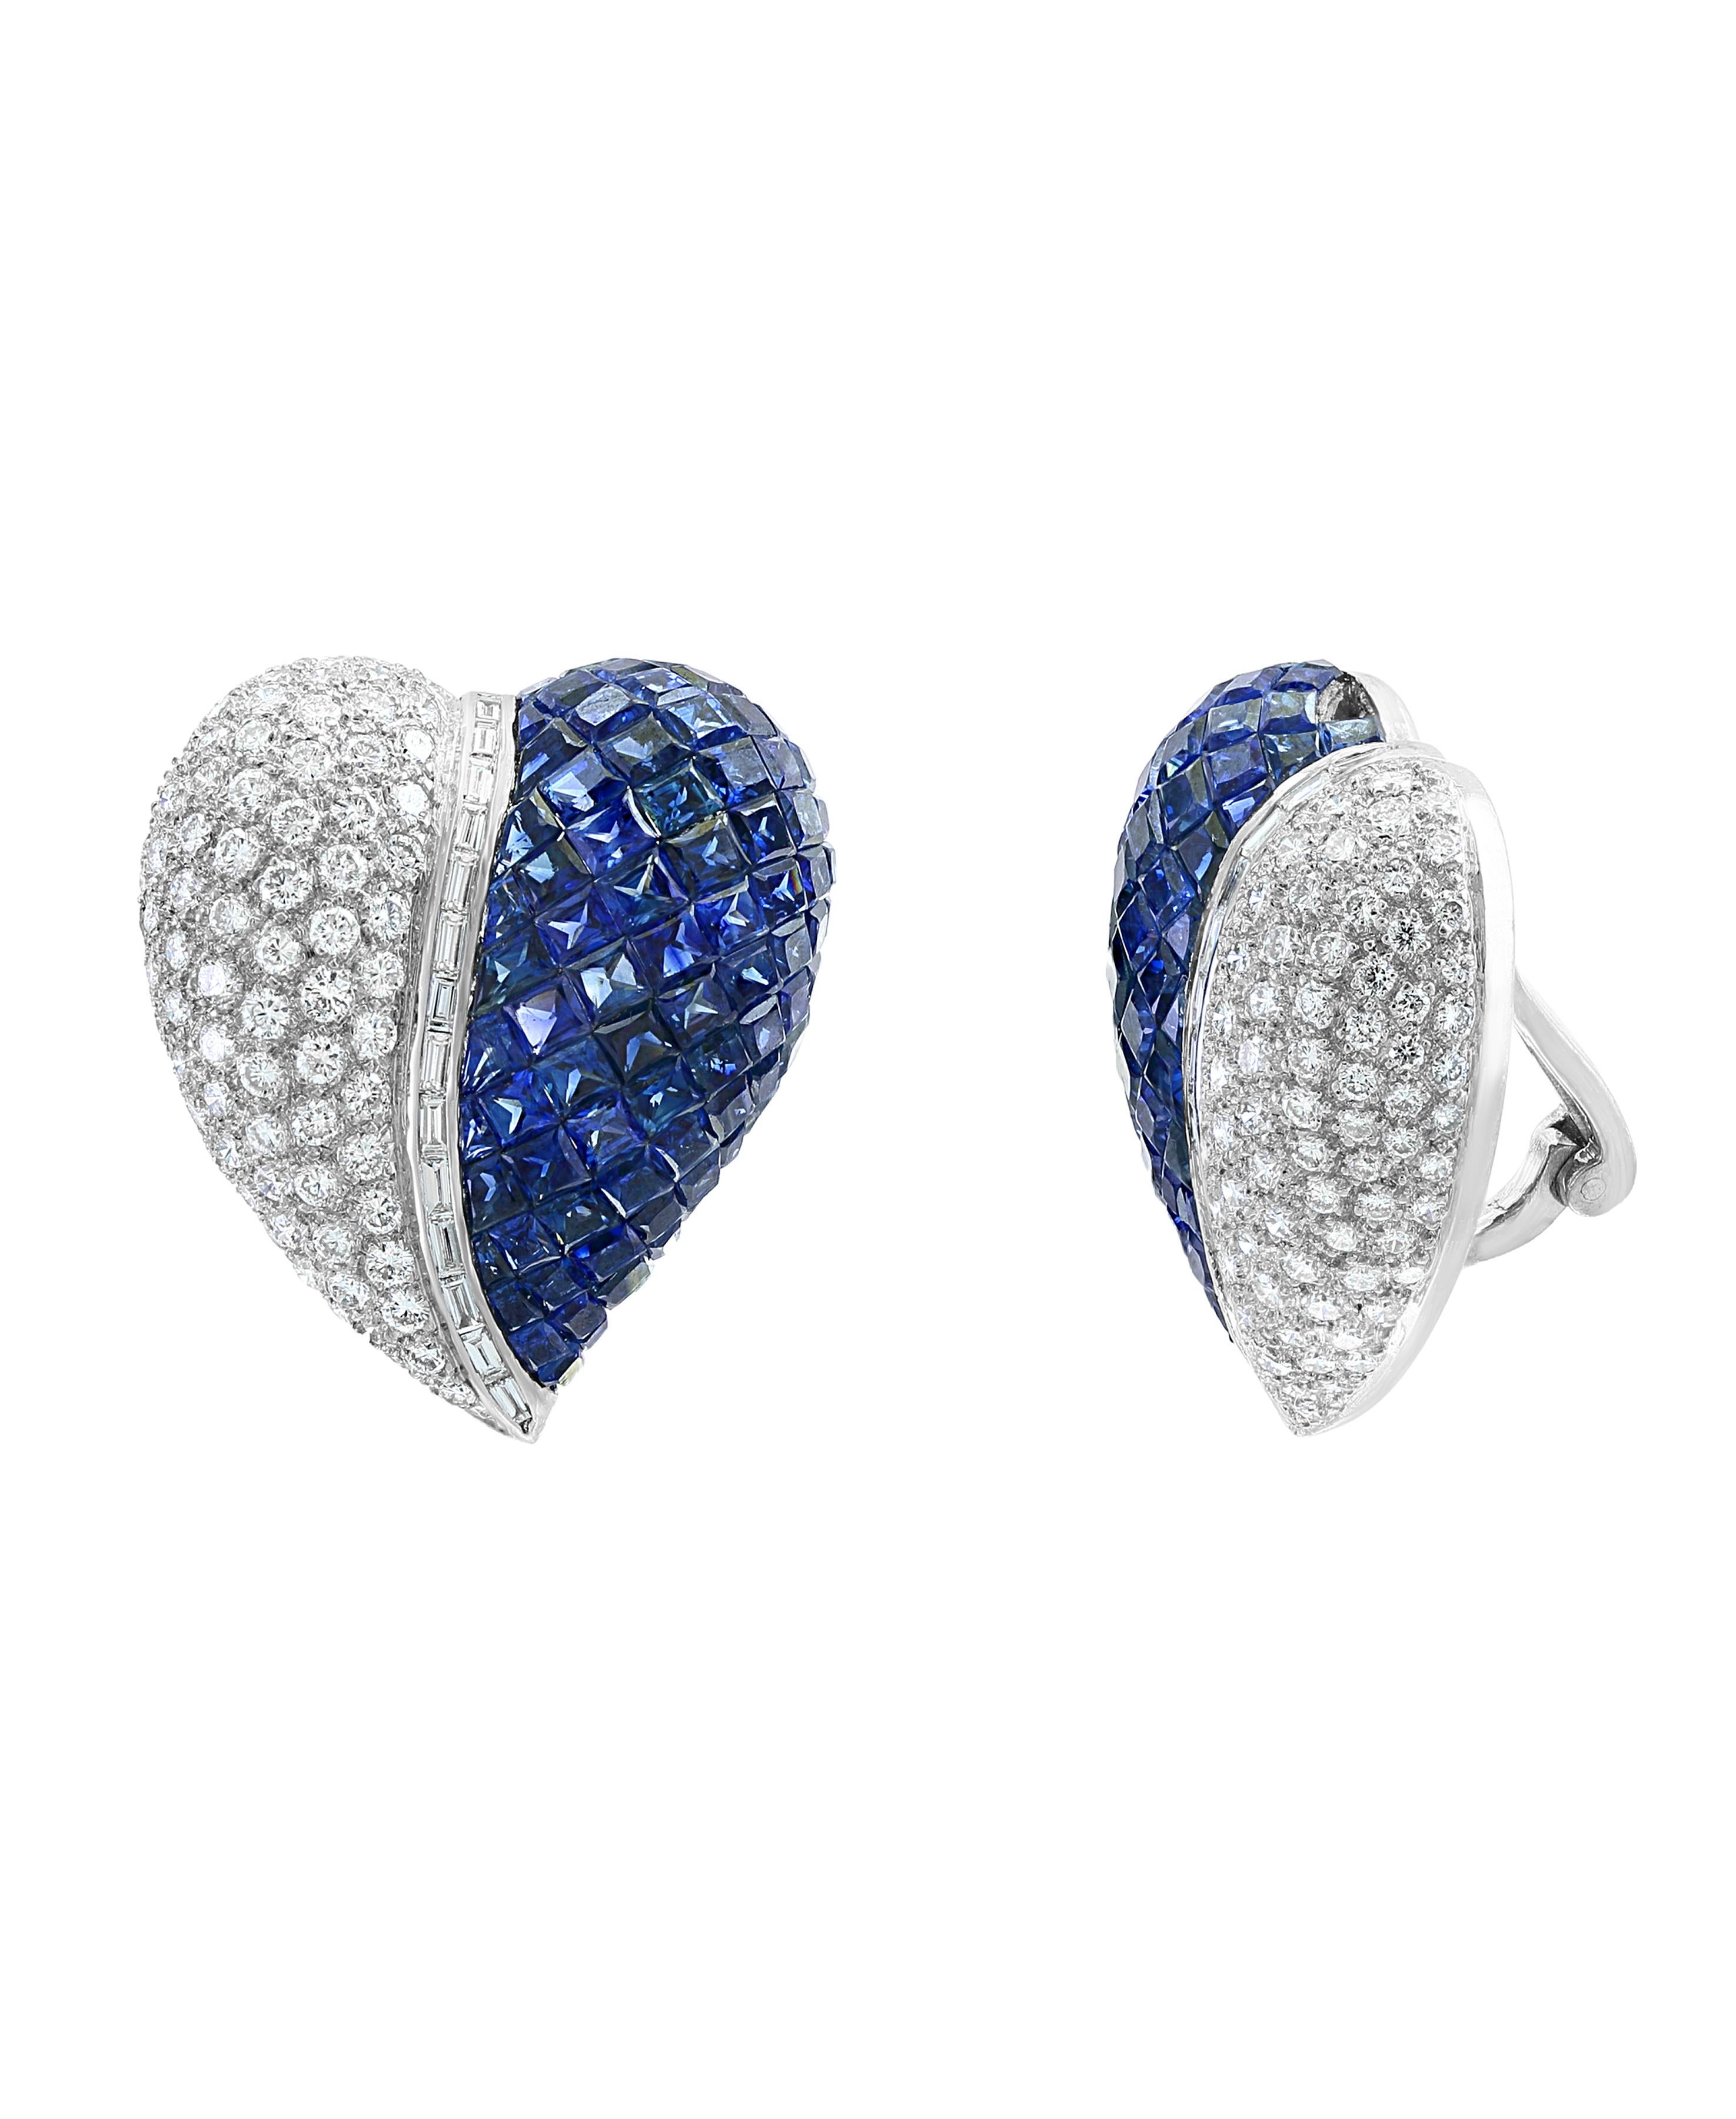 Invisible or Mystery set  blue  Princess cut  Sapphire   And  Diamond  Cocktail Stud  Earring in 18 K  White Gold In Heart shape .
perfect pair made in  18 Karat White  gold . 
18 K gold 30 Grams
 Diamonds: approximate 5.5 carat , VS Quality G